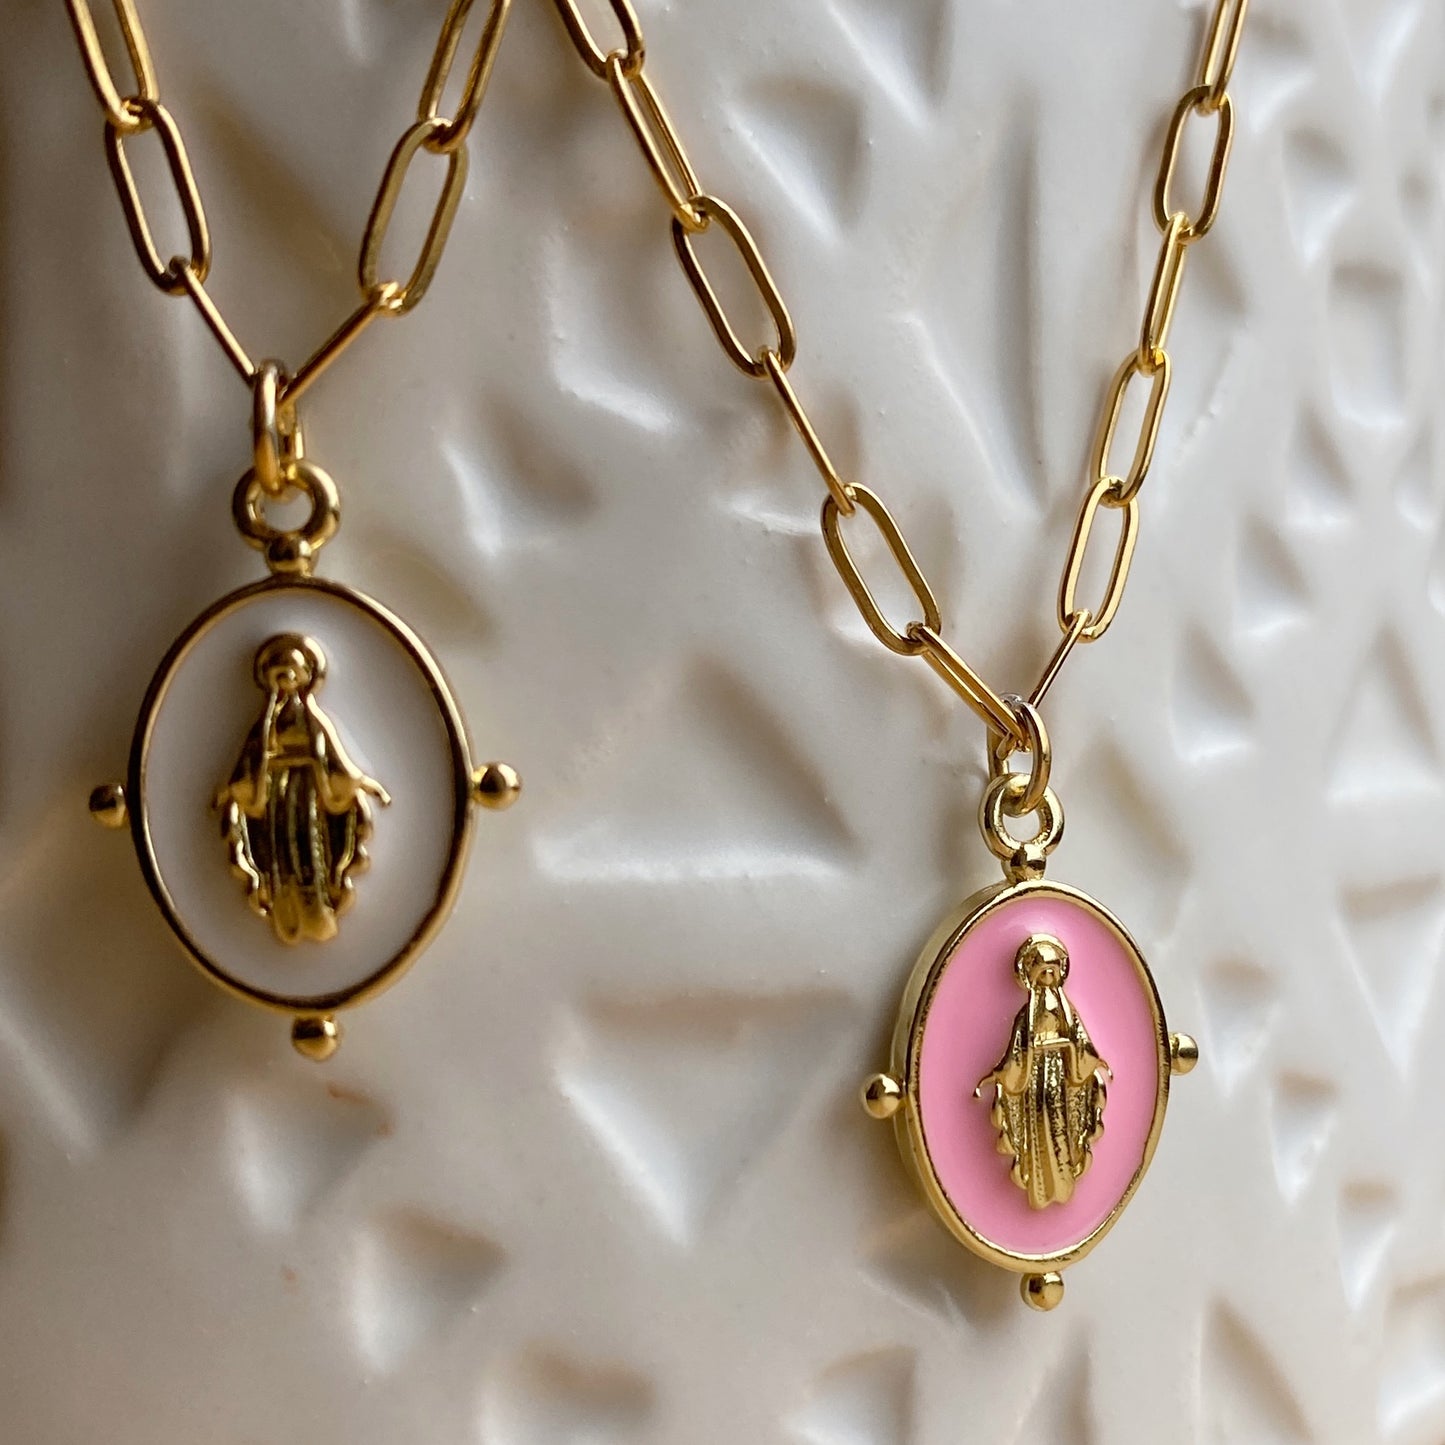 Mary Necklace Gold Enamel Stainless Steel Paperclip Waterproof Sacred Mother Jewelry Pink or White